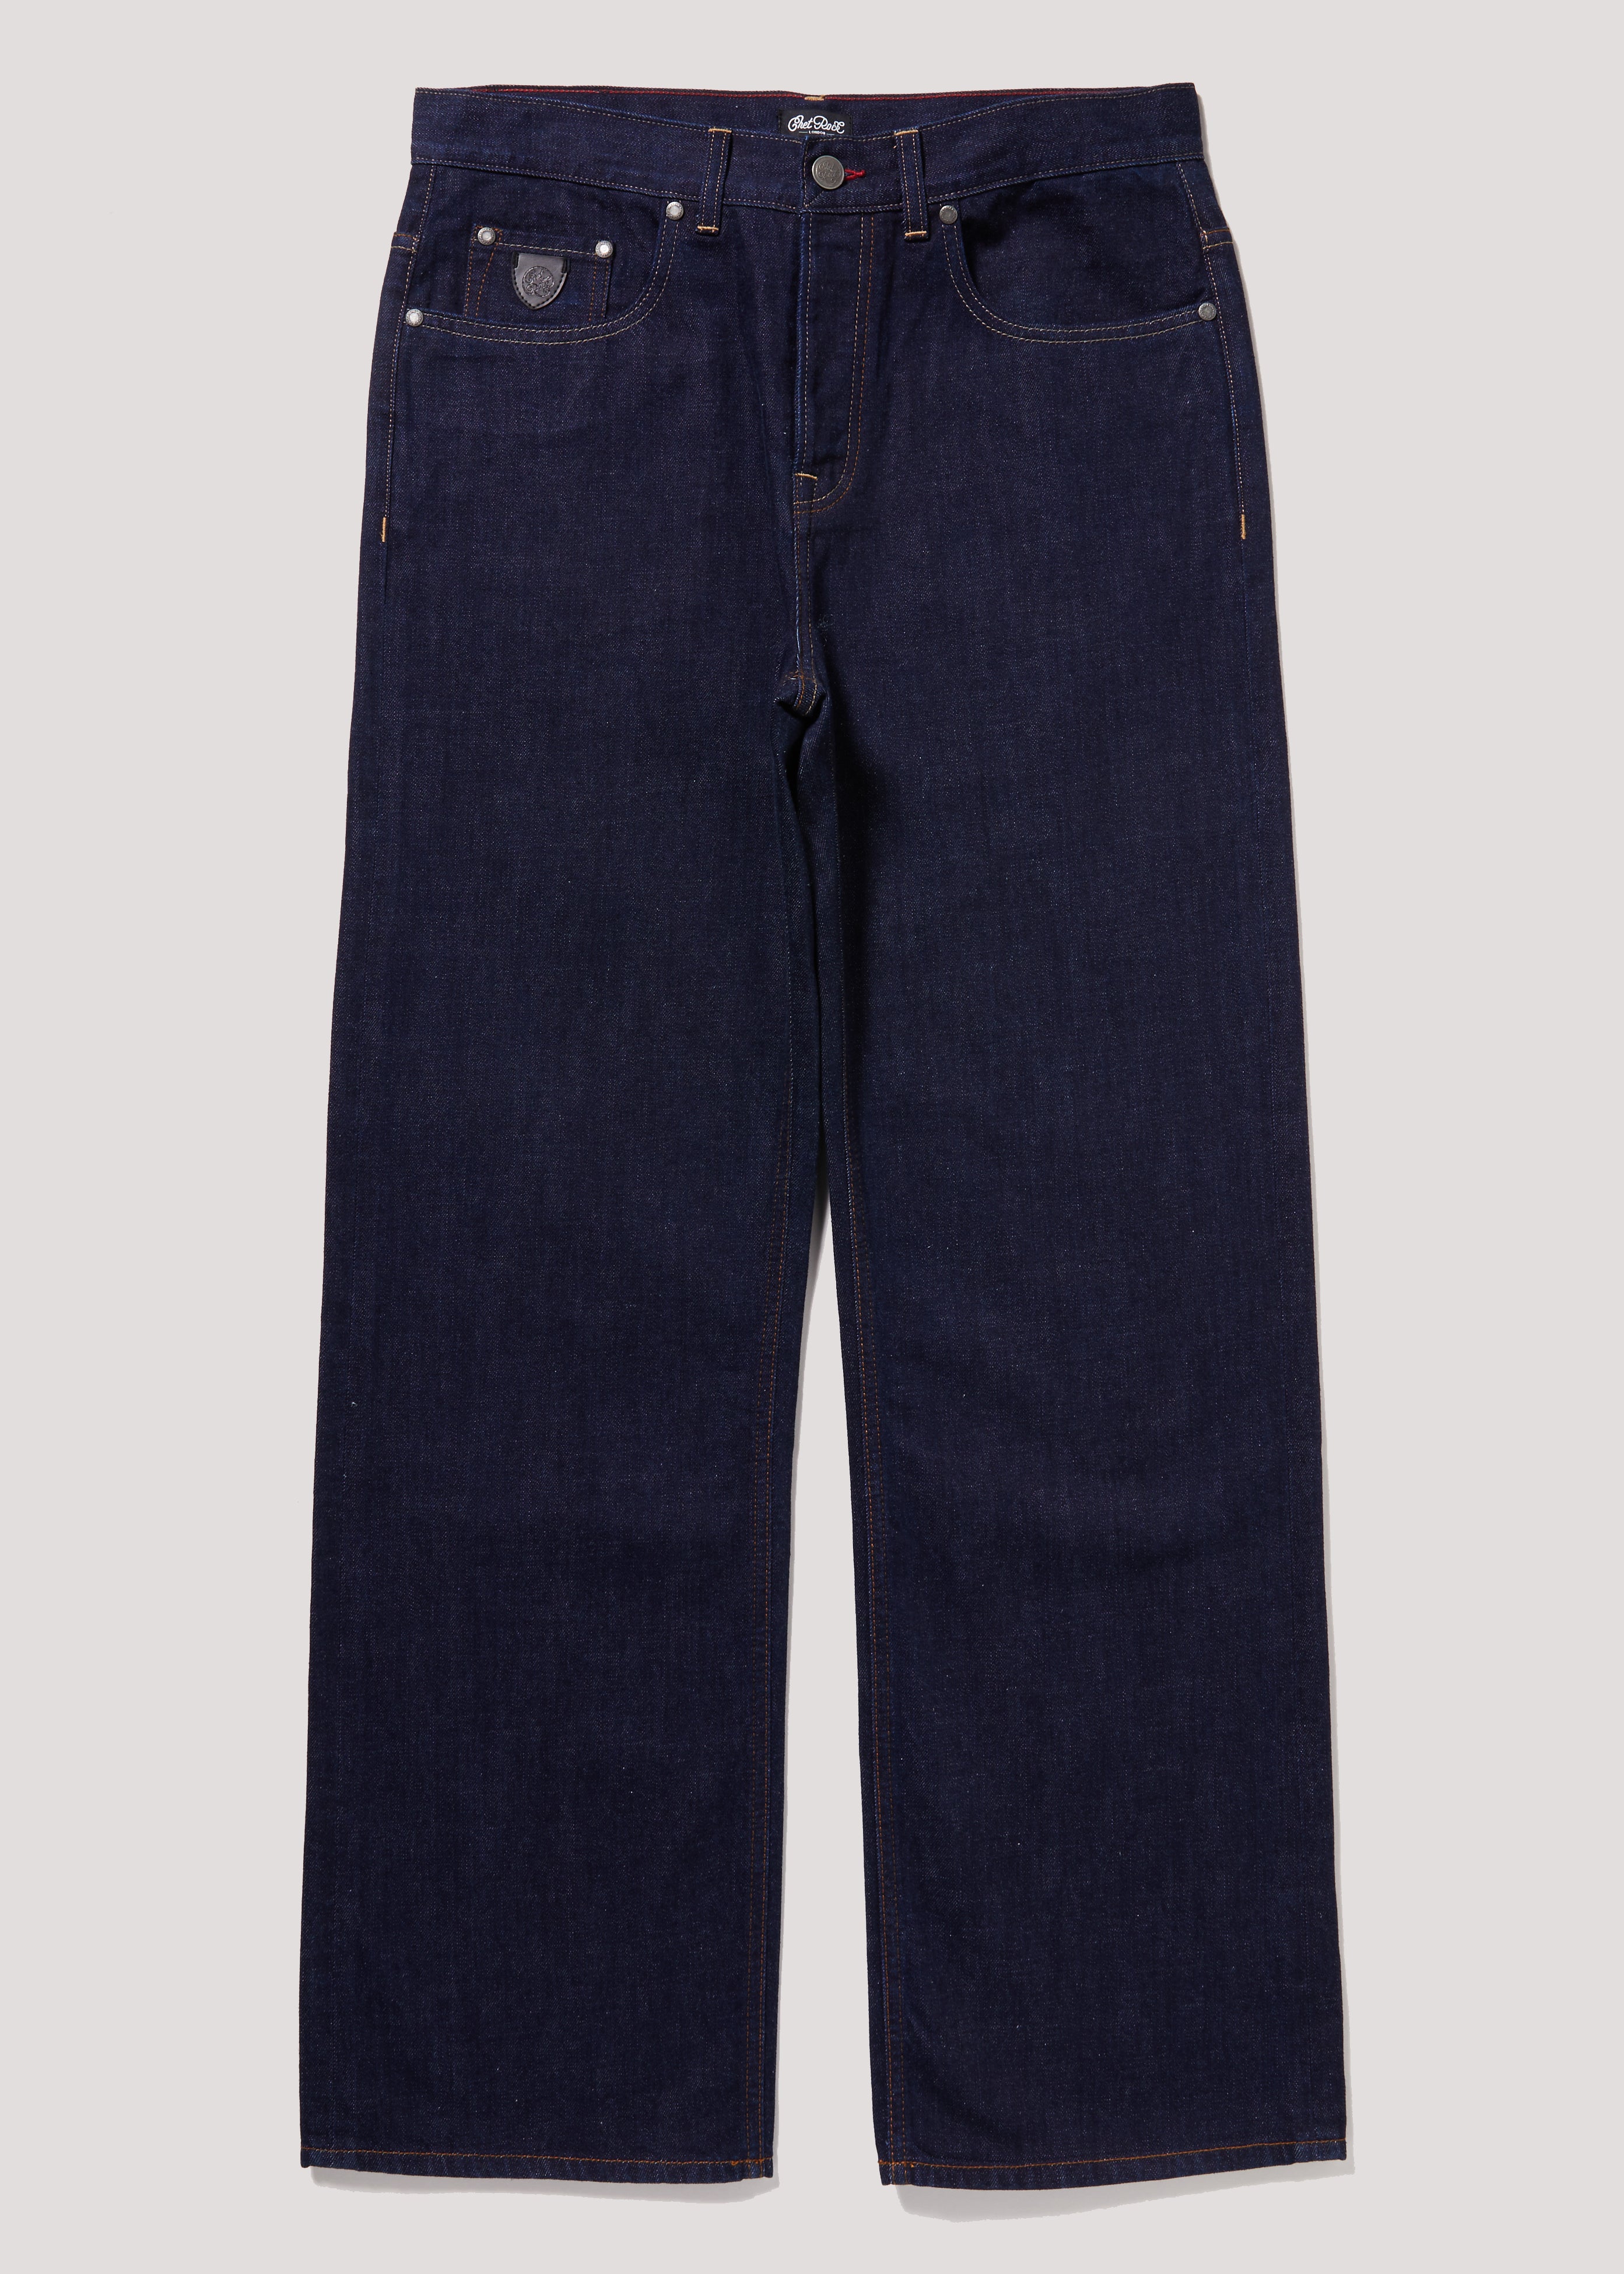 Mabry Jeans - Rinse